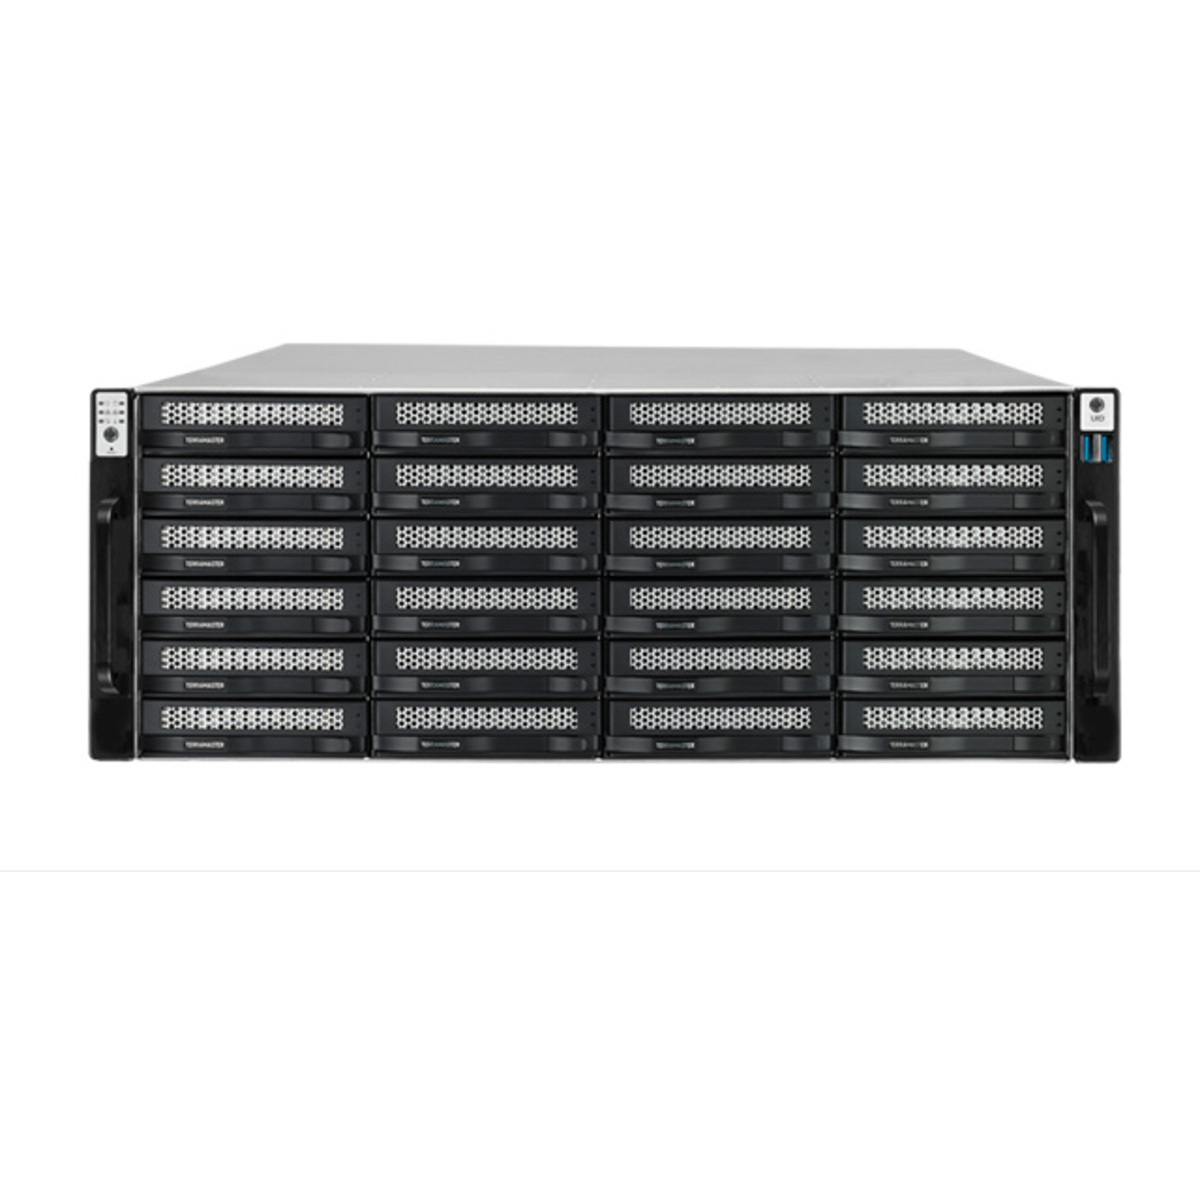 TerraMaster U24-722-2224 24tb 24-Bay RackMount Large Business / Enterprise NAS - Network Attached Storage Device 24x1tb Western Digital Red SA500 WDS100T1R0A 2.5 560/530MB/s SATA 6Gb/s SSD NAS Class Drives Installed - Burn-In Tested U24-722-2224